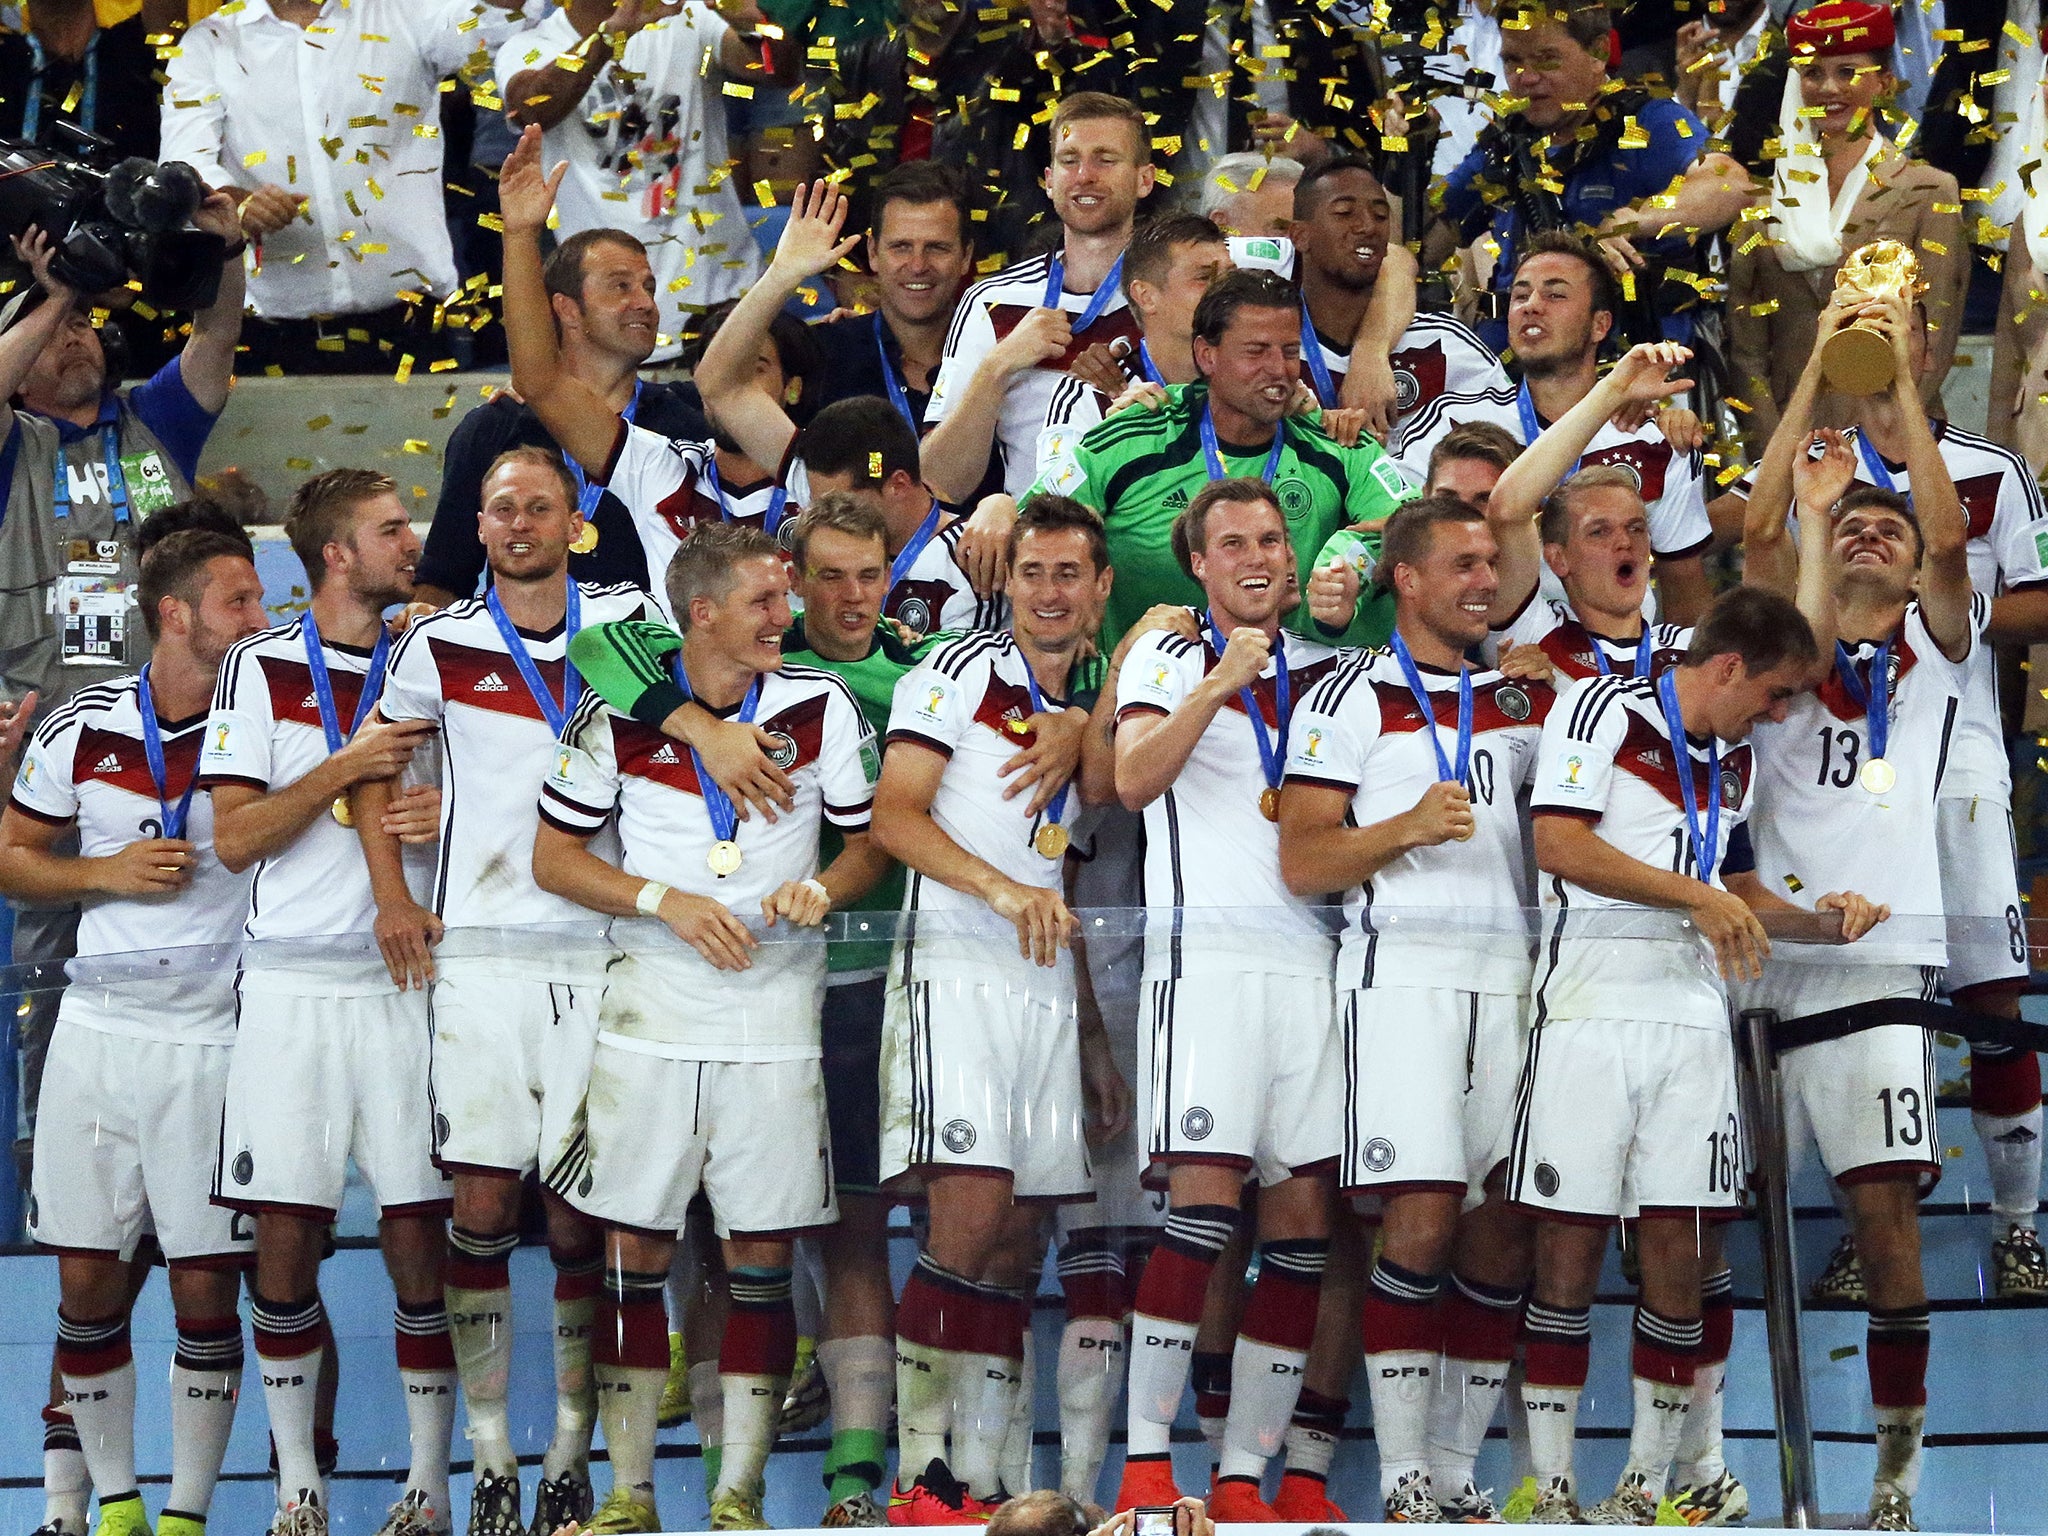 2014 World Cup: Germany defeats Argentina - Sports Illustrated Vault